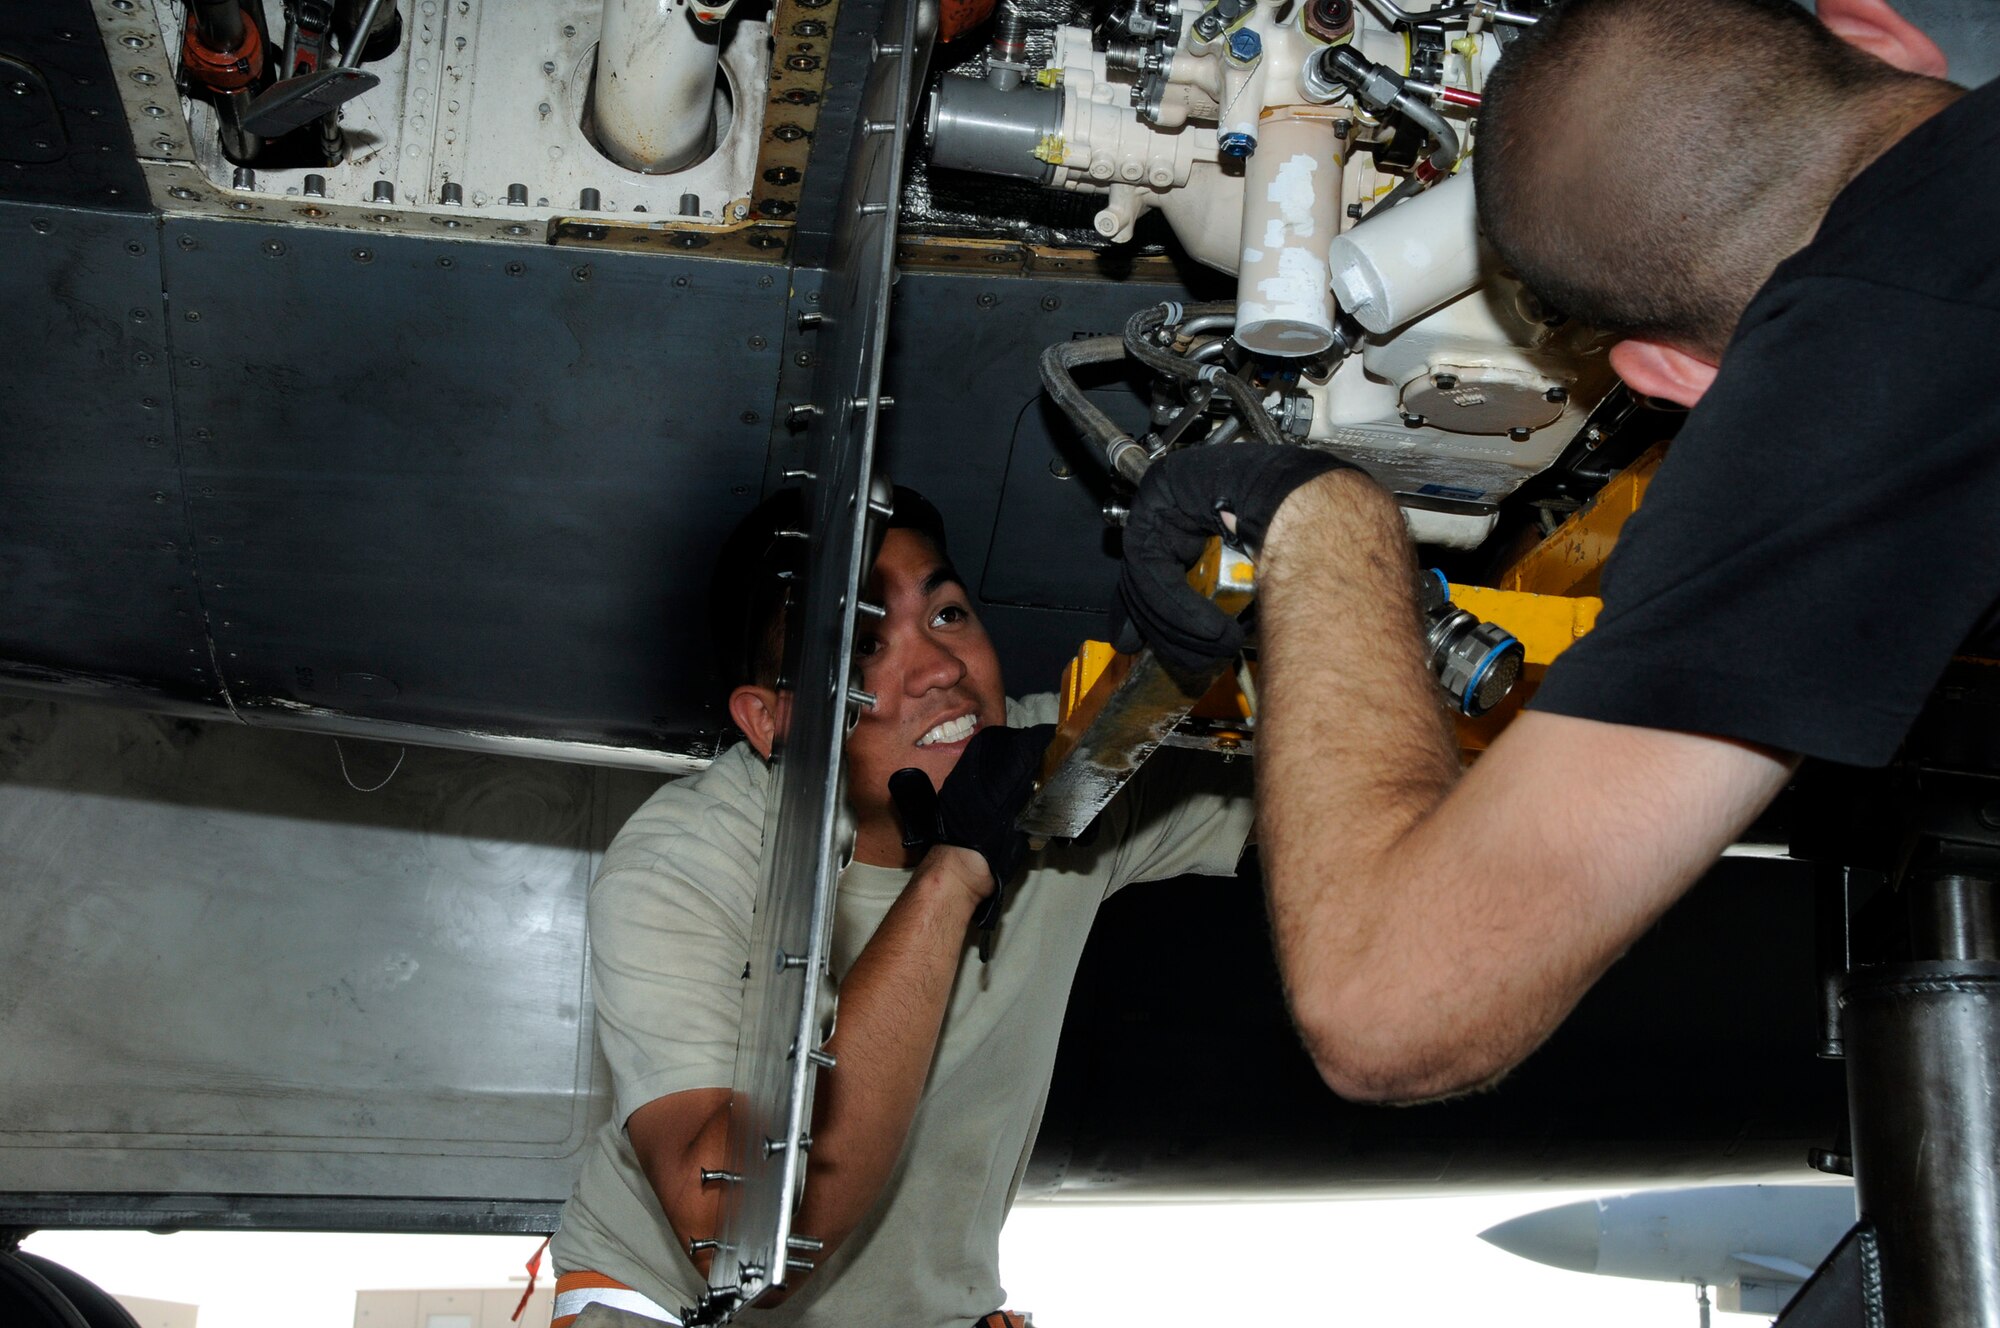 Airman 1st Class John Quintanila and Staff Sgt. Andrew Grato, 379th Expeditionary Aircraft Maintenance Squadron, 34th Aircraft Maintenance Unit, carefully watch edge clearances while positioning an Auxiliary Power Unit Sept. 23, 2008.  The APU had to be replaced after an interior leak was discovered.  The work crew pulled the malfunctioning unit, prepared the replacement unit, and installed the new APU into a B-1 Lancer at an undisclosed air base in Southwest Asia.   The B-1, with long loiter times, massive payload, speed and precision weapons capabilities provides valuable close air support to ground combatants engaged in Operations Iraqi and Enduring Freedom.  Sergeant Grato hails from Saugus, Mass., and Airman Quintanila is a native of Agat, Guam; both are deployed from Ellsworth Air Force Base, S.D.  (U.S. Air Force photo by Tech. Sgt. Michael Boquette/Released)